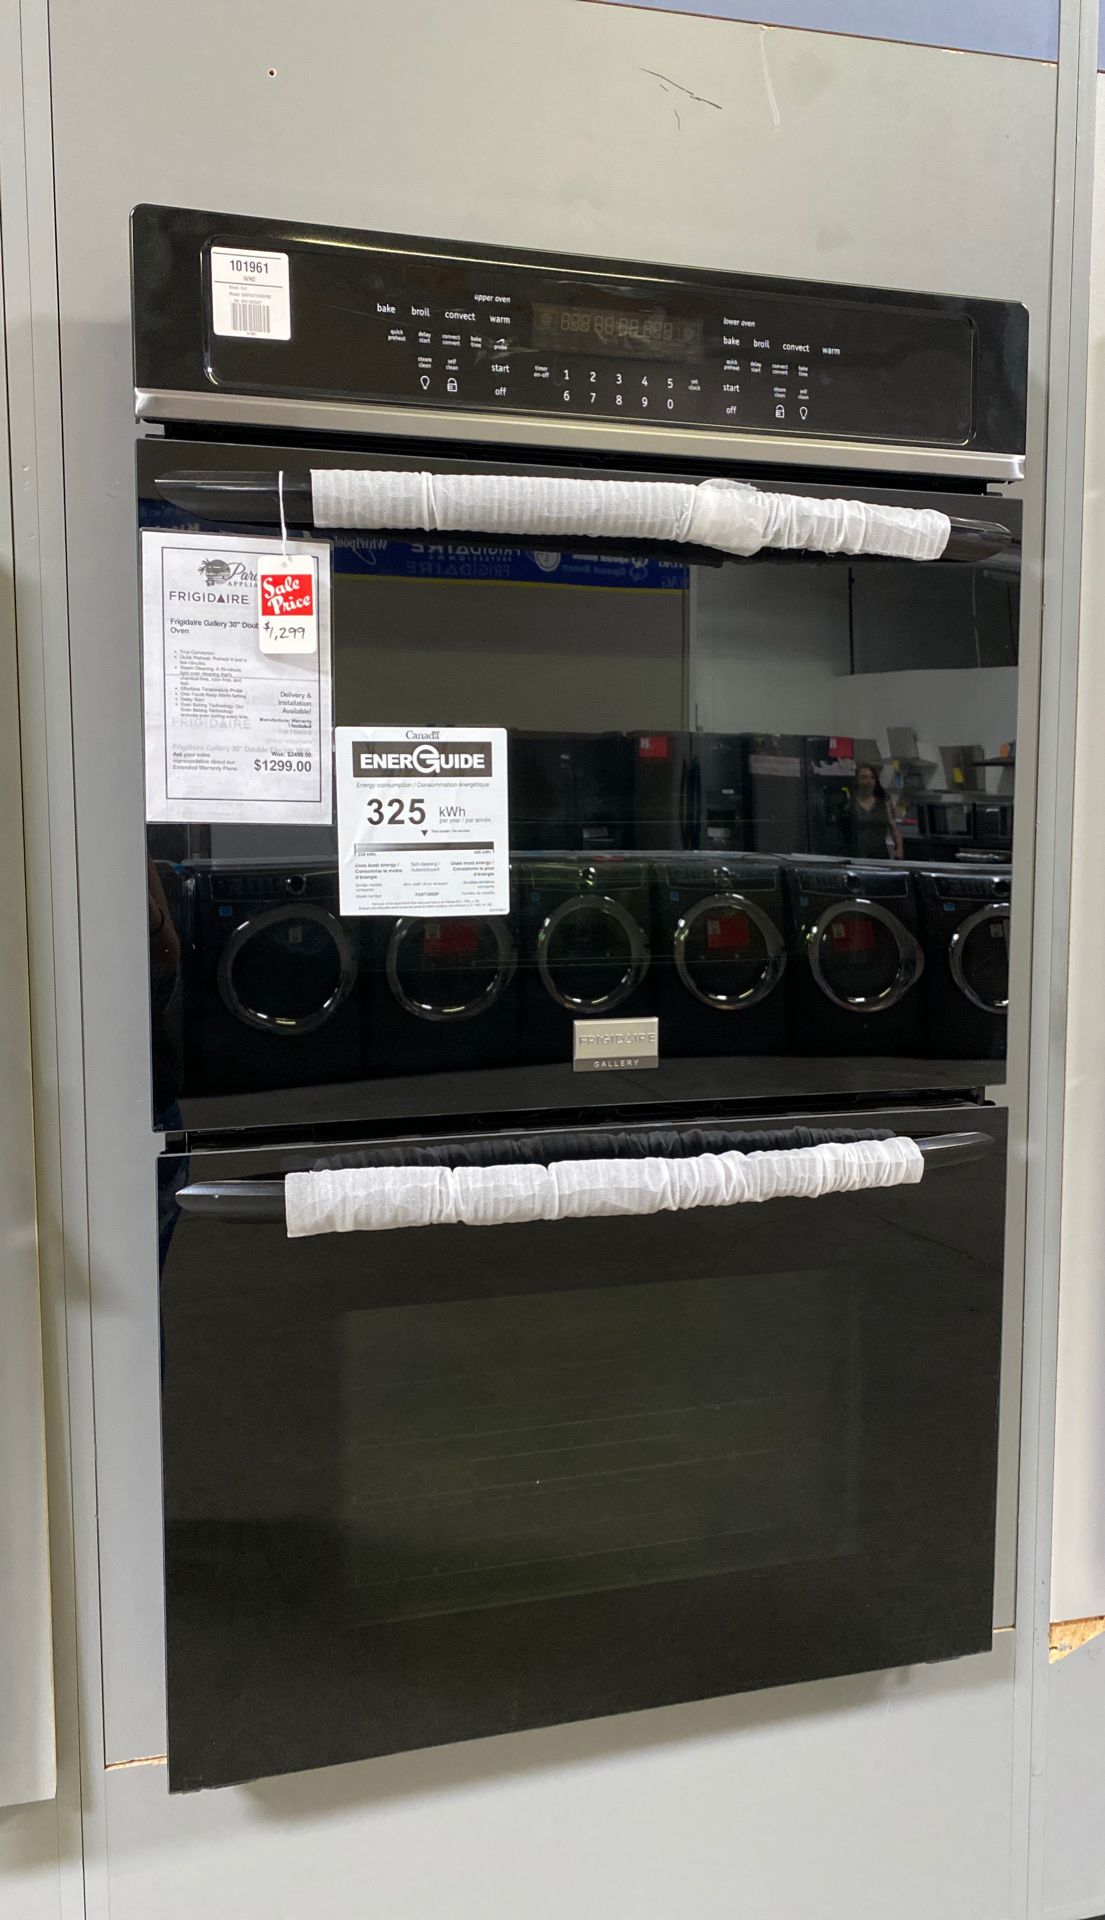 NEW! Black Frigidaire Gallery 30" Double Wall Oven!